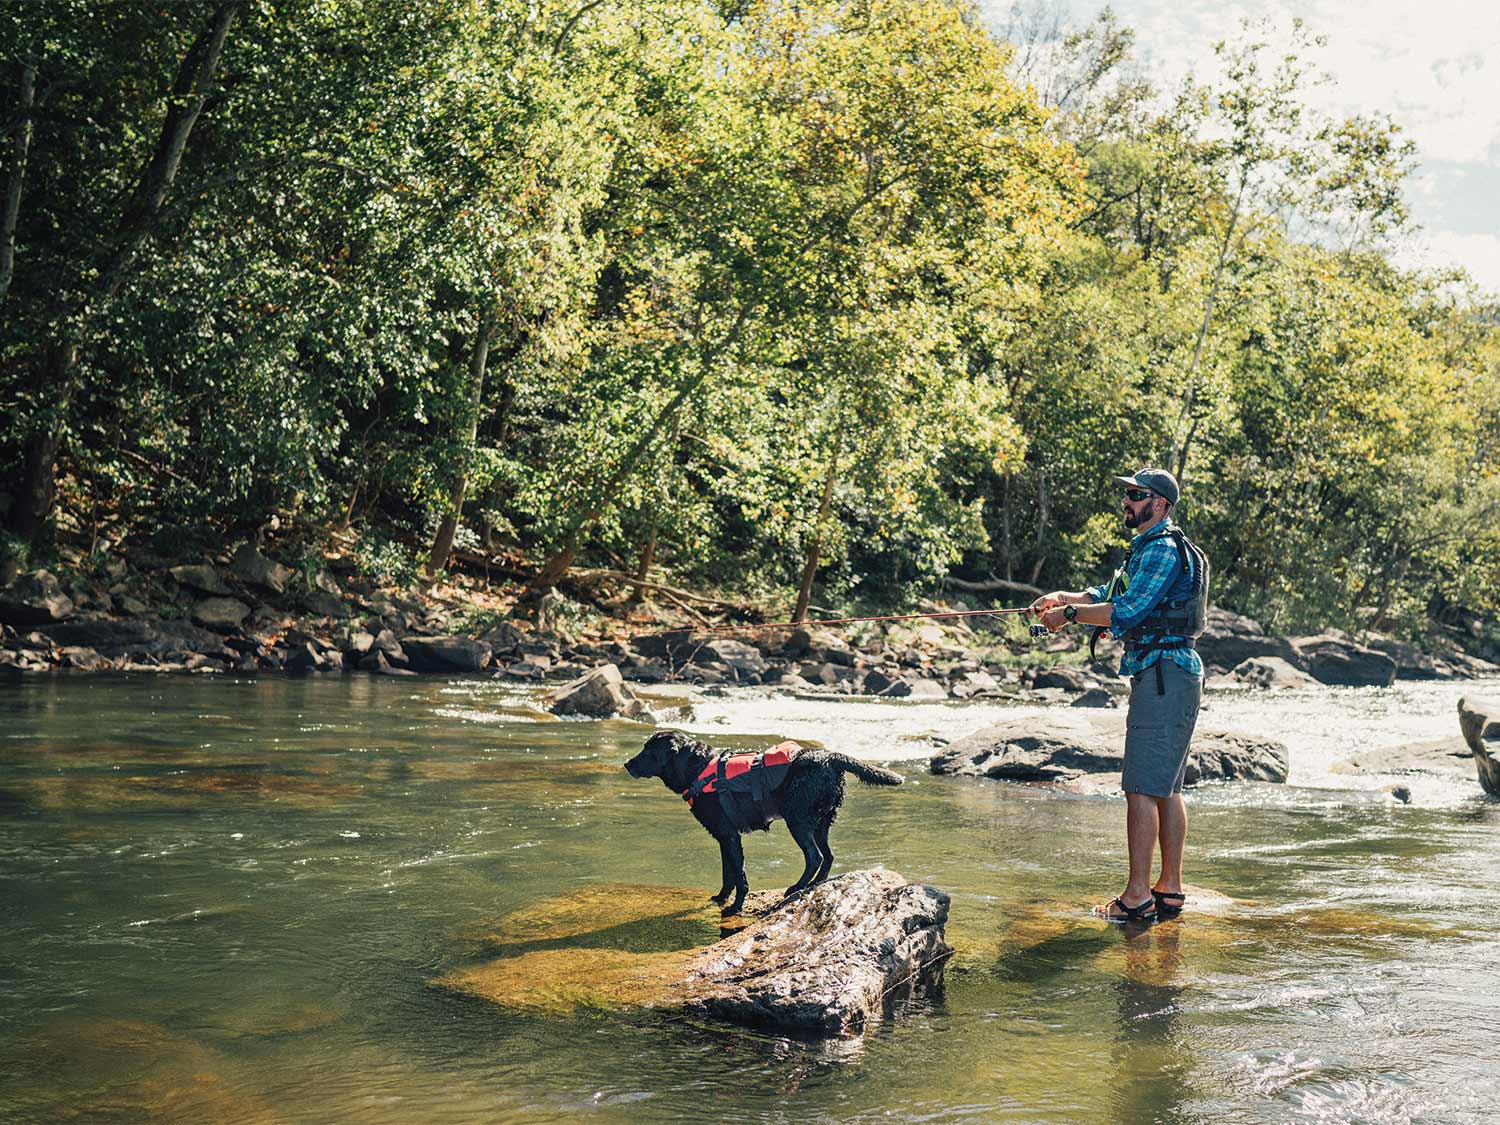 Angler and a dog in a river.